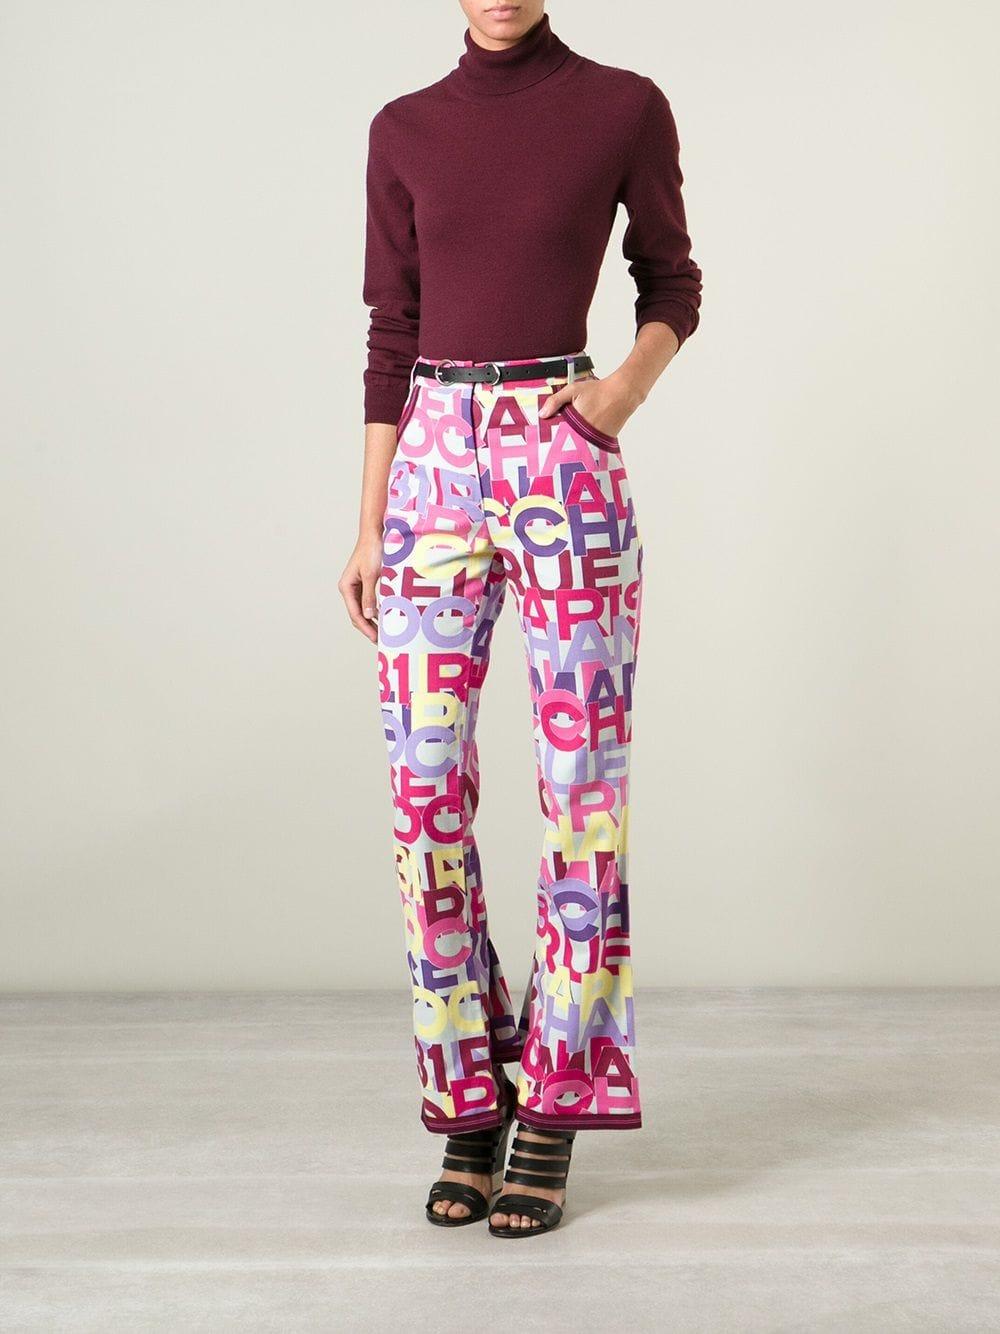 Chanel printed trousers in multi-colored stretch cotton with belt loops, button and zip, grosgrain on the hem, side pockets and flared style.

The product has a small stain on the front as shown in the pictures.

Years: 2000s 

Made in Italy

Size: